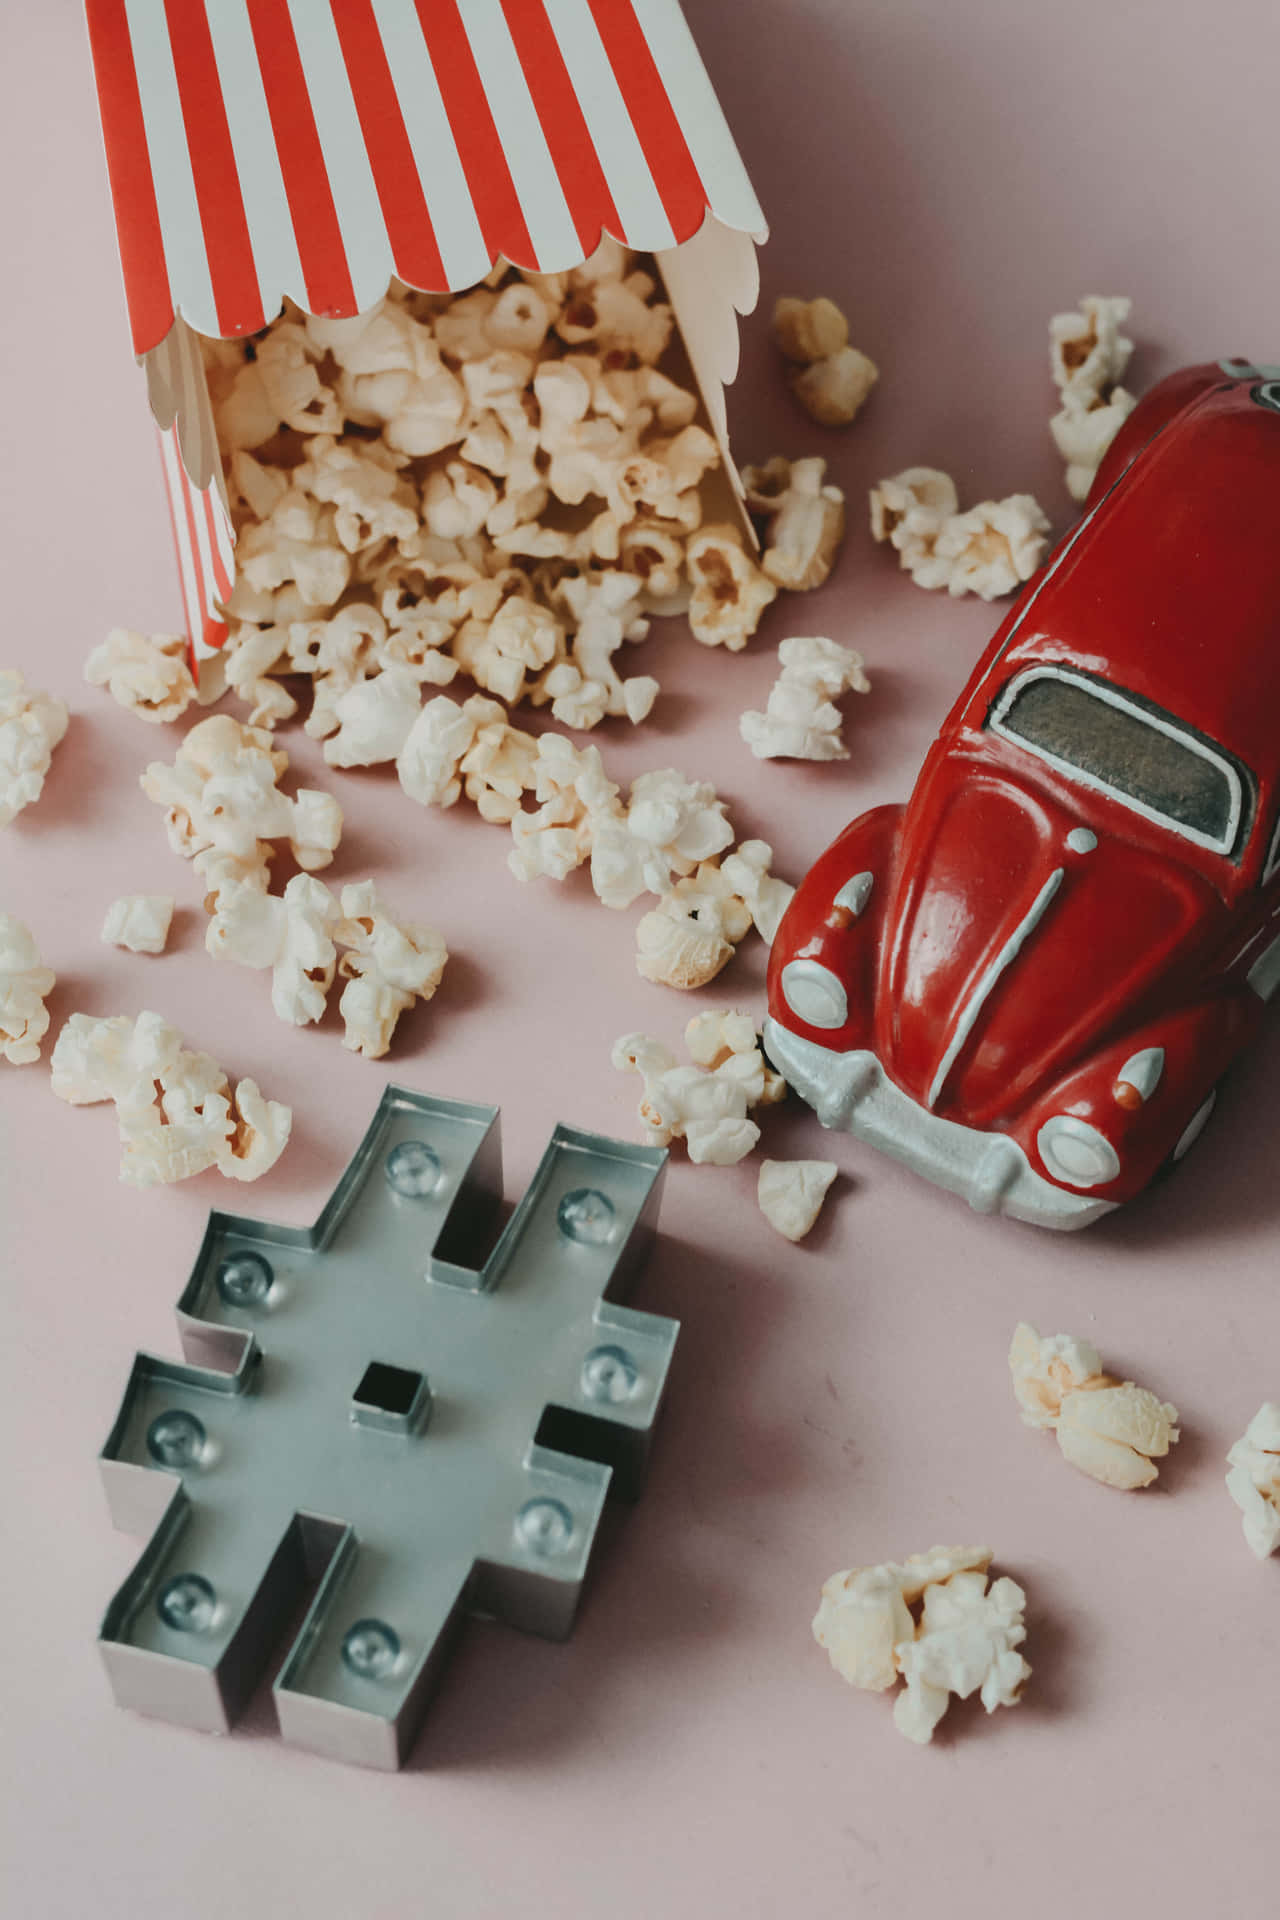 A Red Car And Popcorn Box On A Pink Background